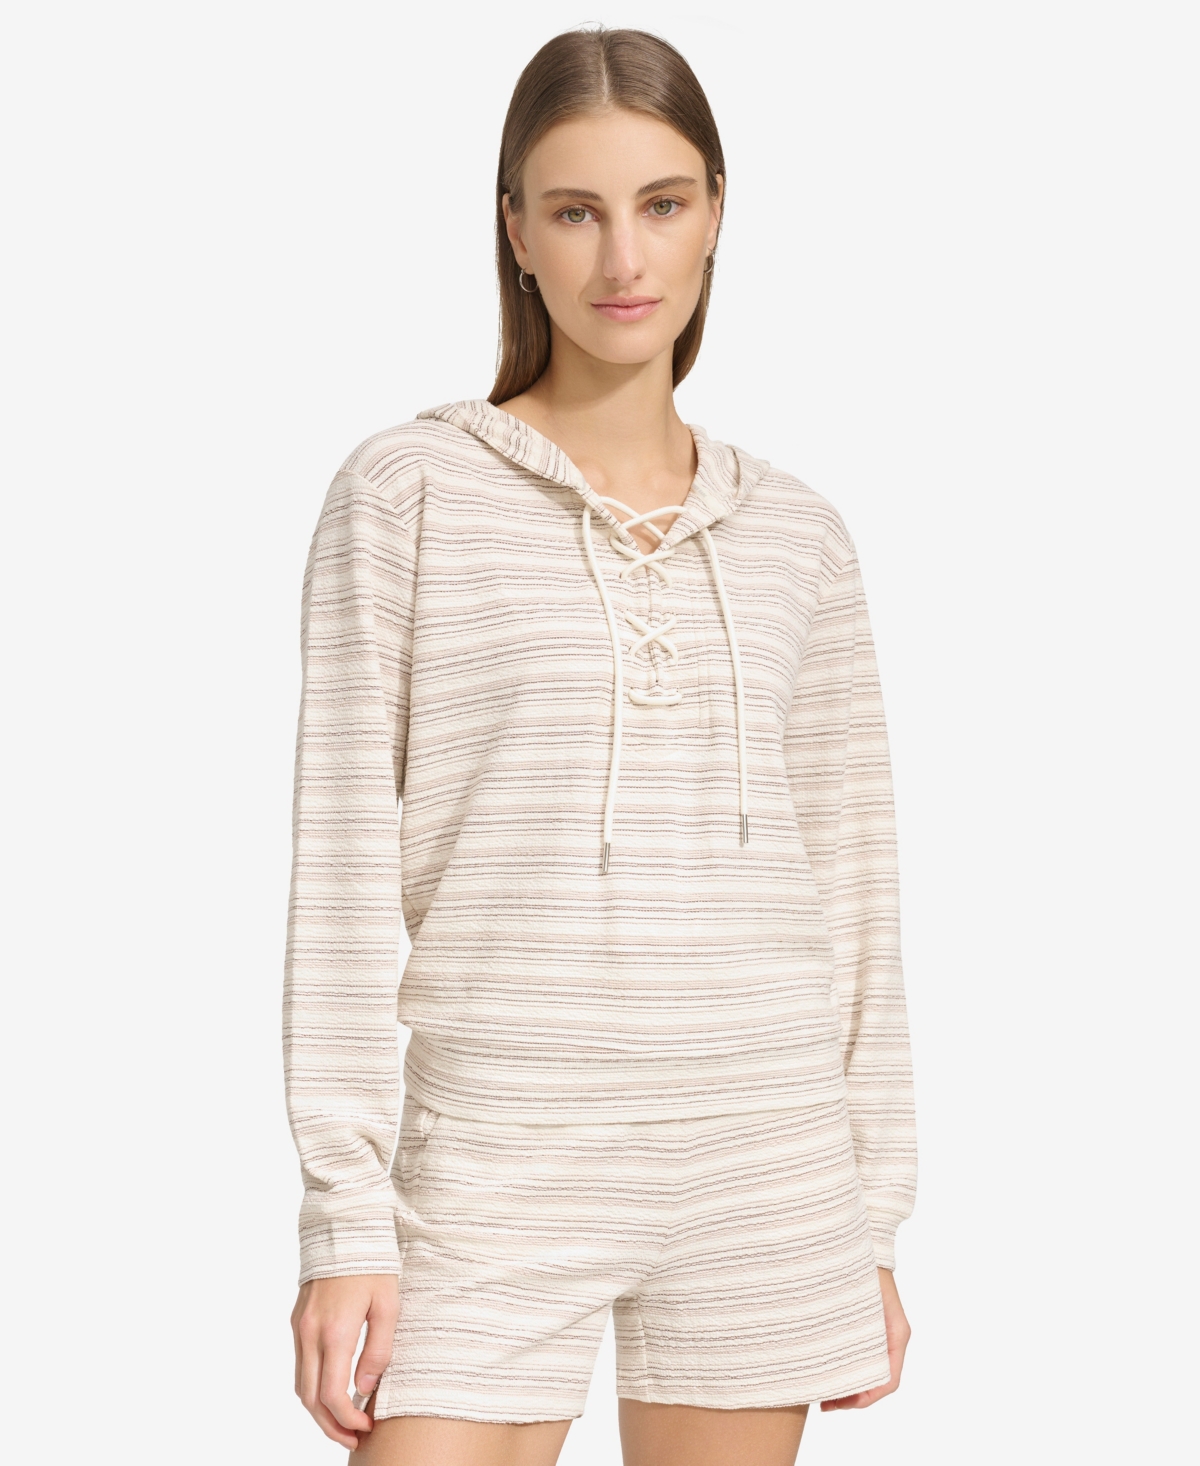 Andrew Marc Sport Women's Heritage Striped Lace-Up Hoodie - Oatmeal Combo